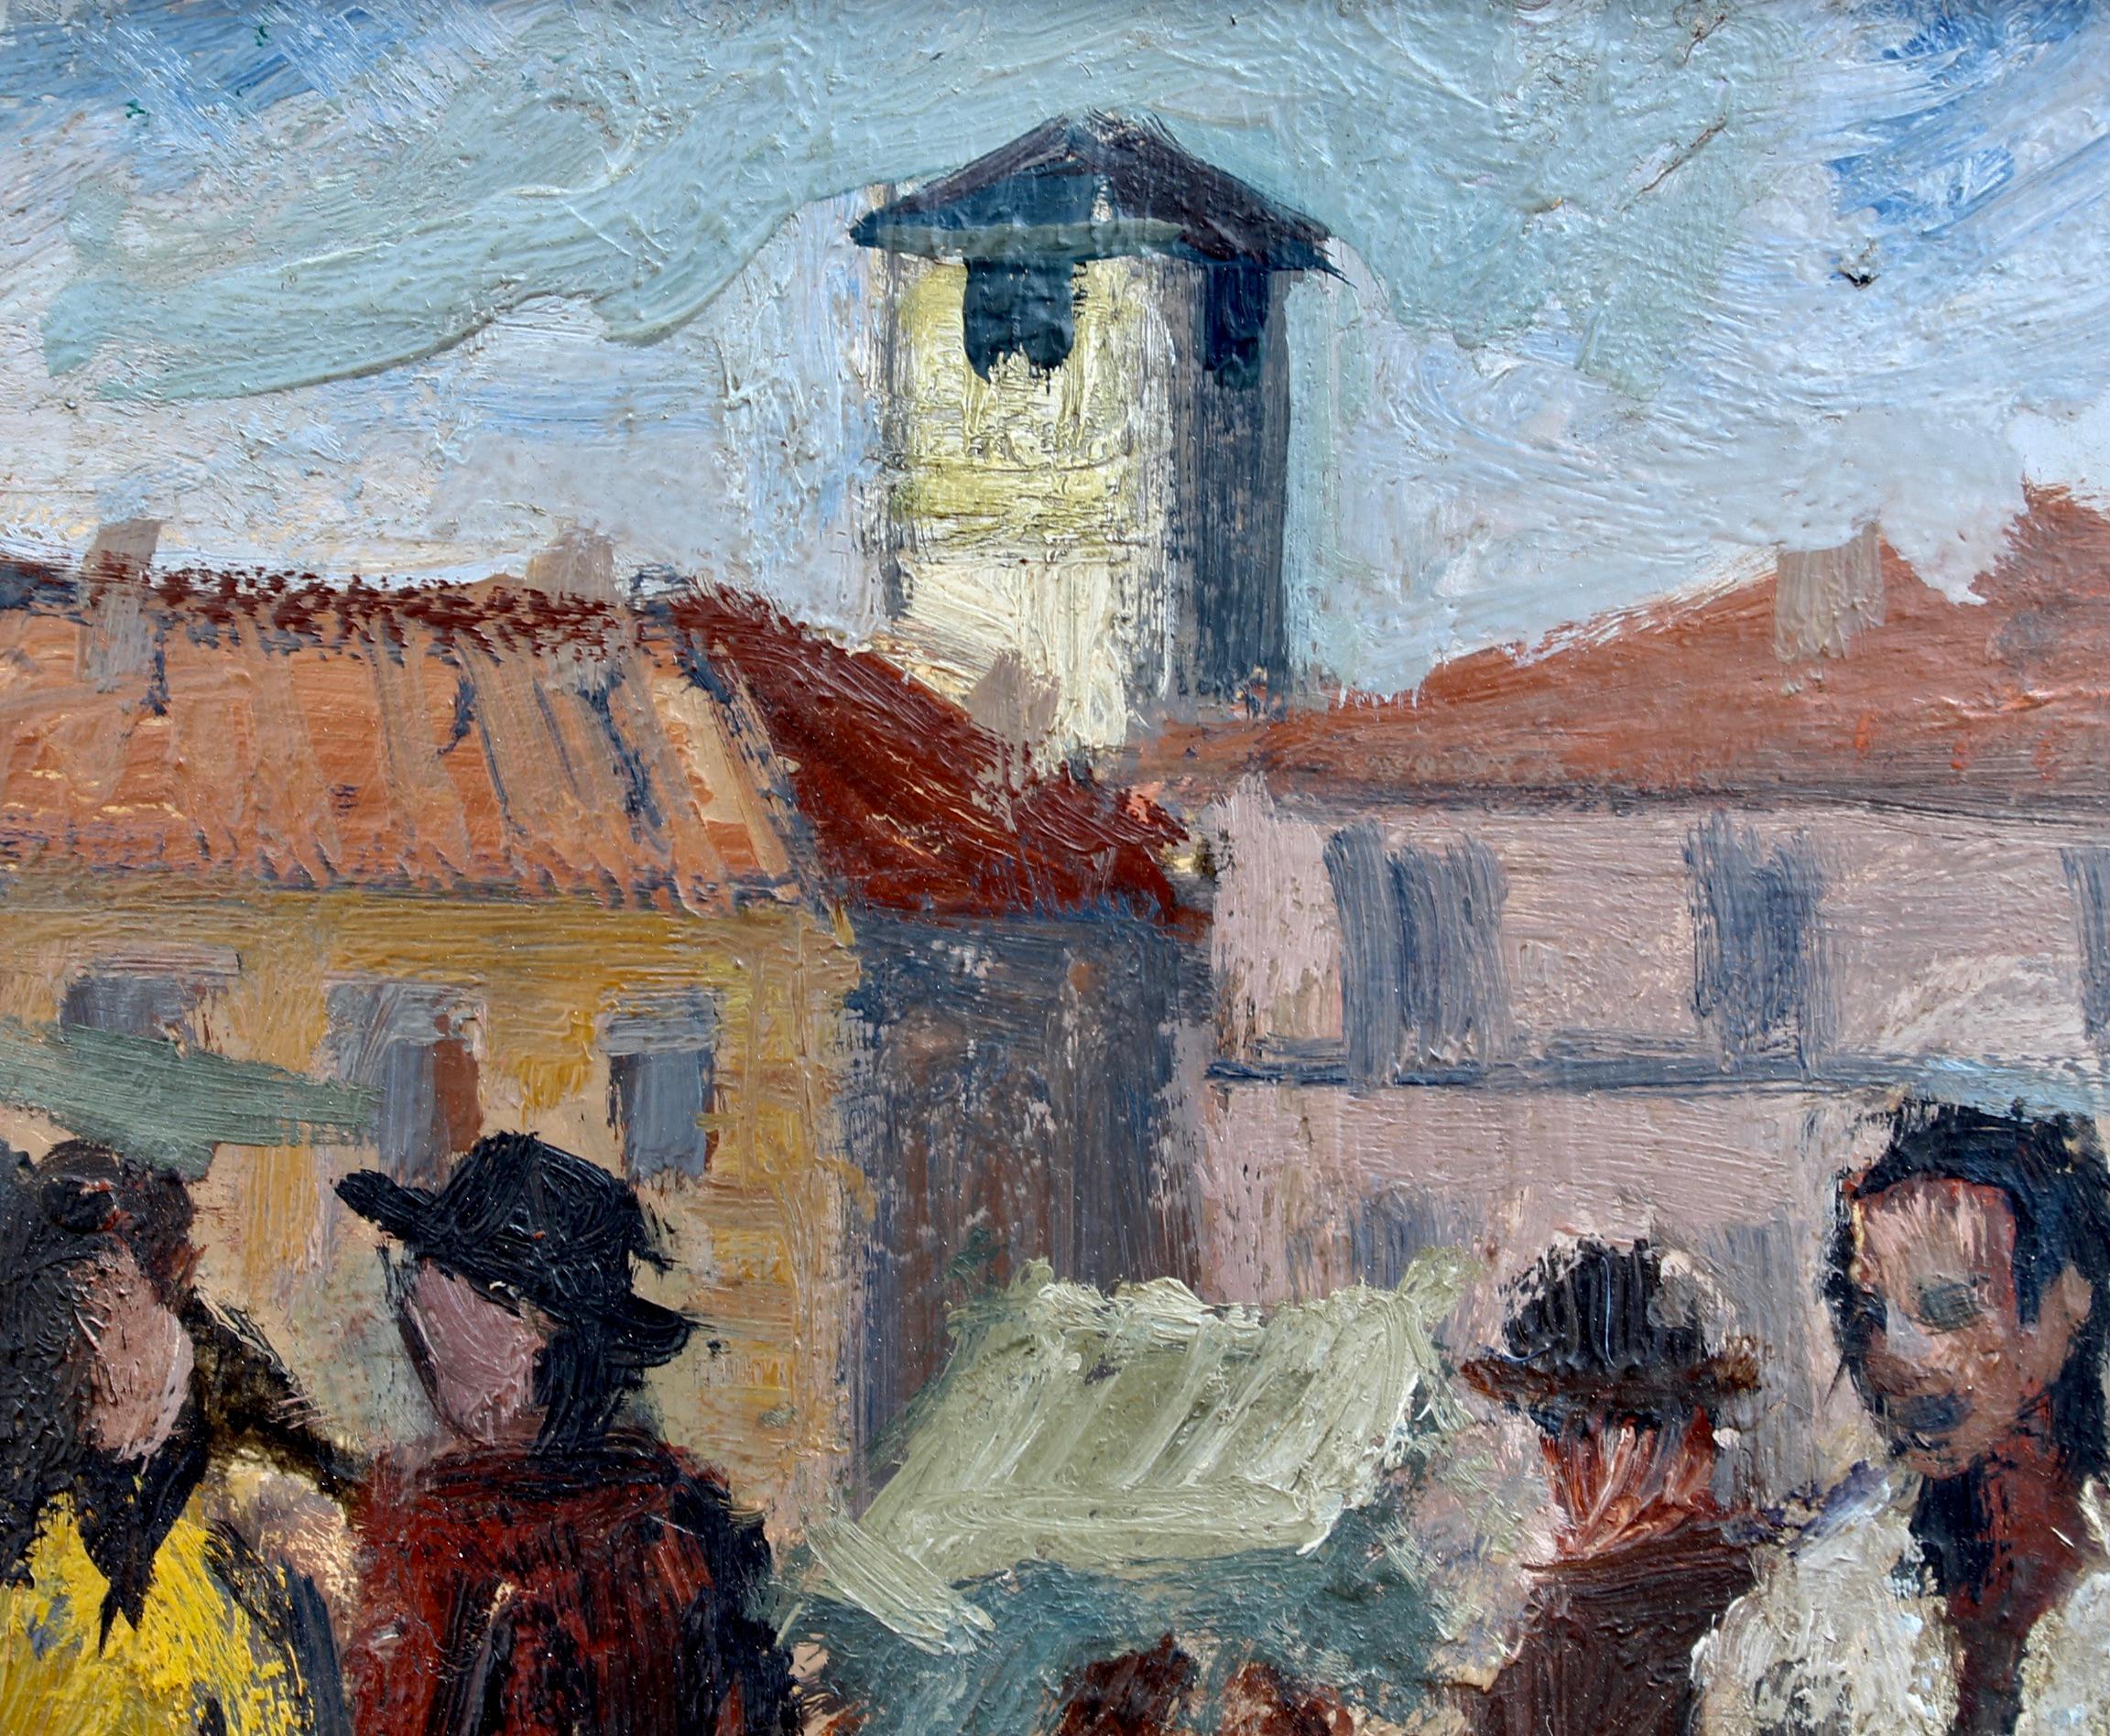 Market Day in Piazza Grande Locarno Switzerland - Expressionist Painting by Unknown